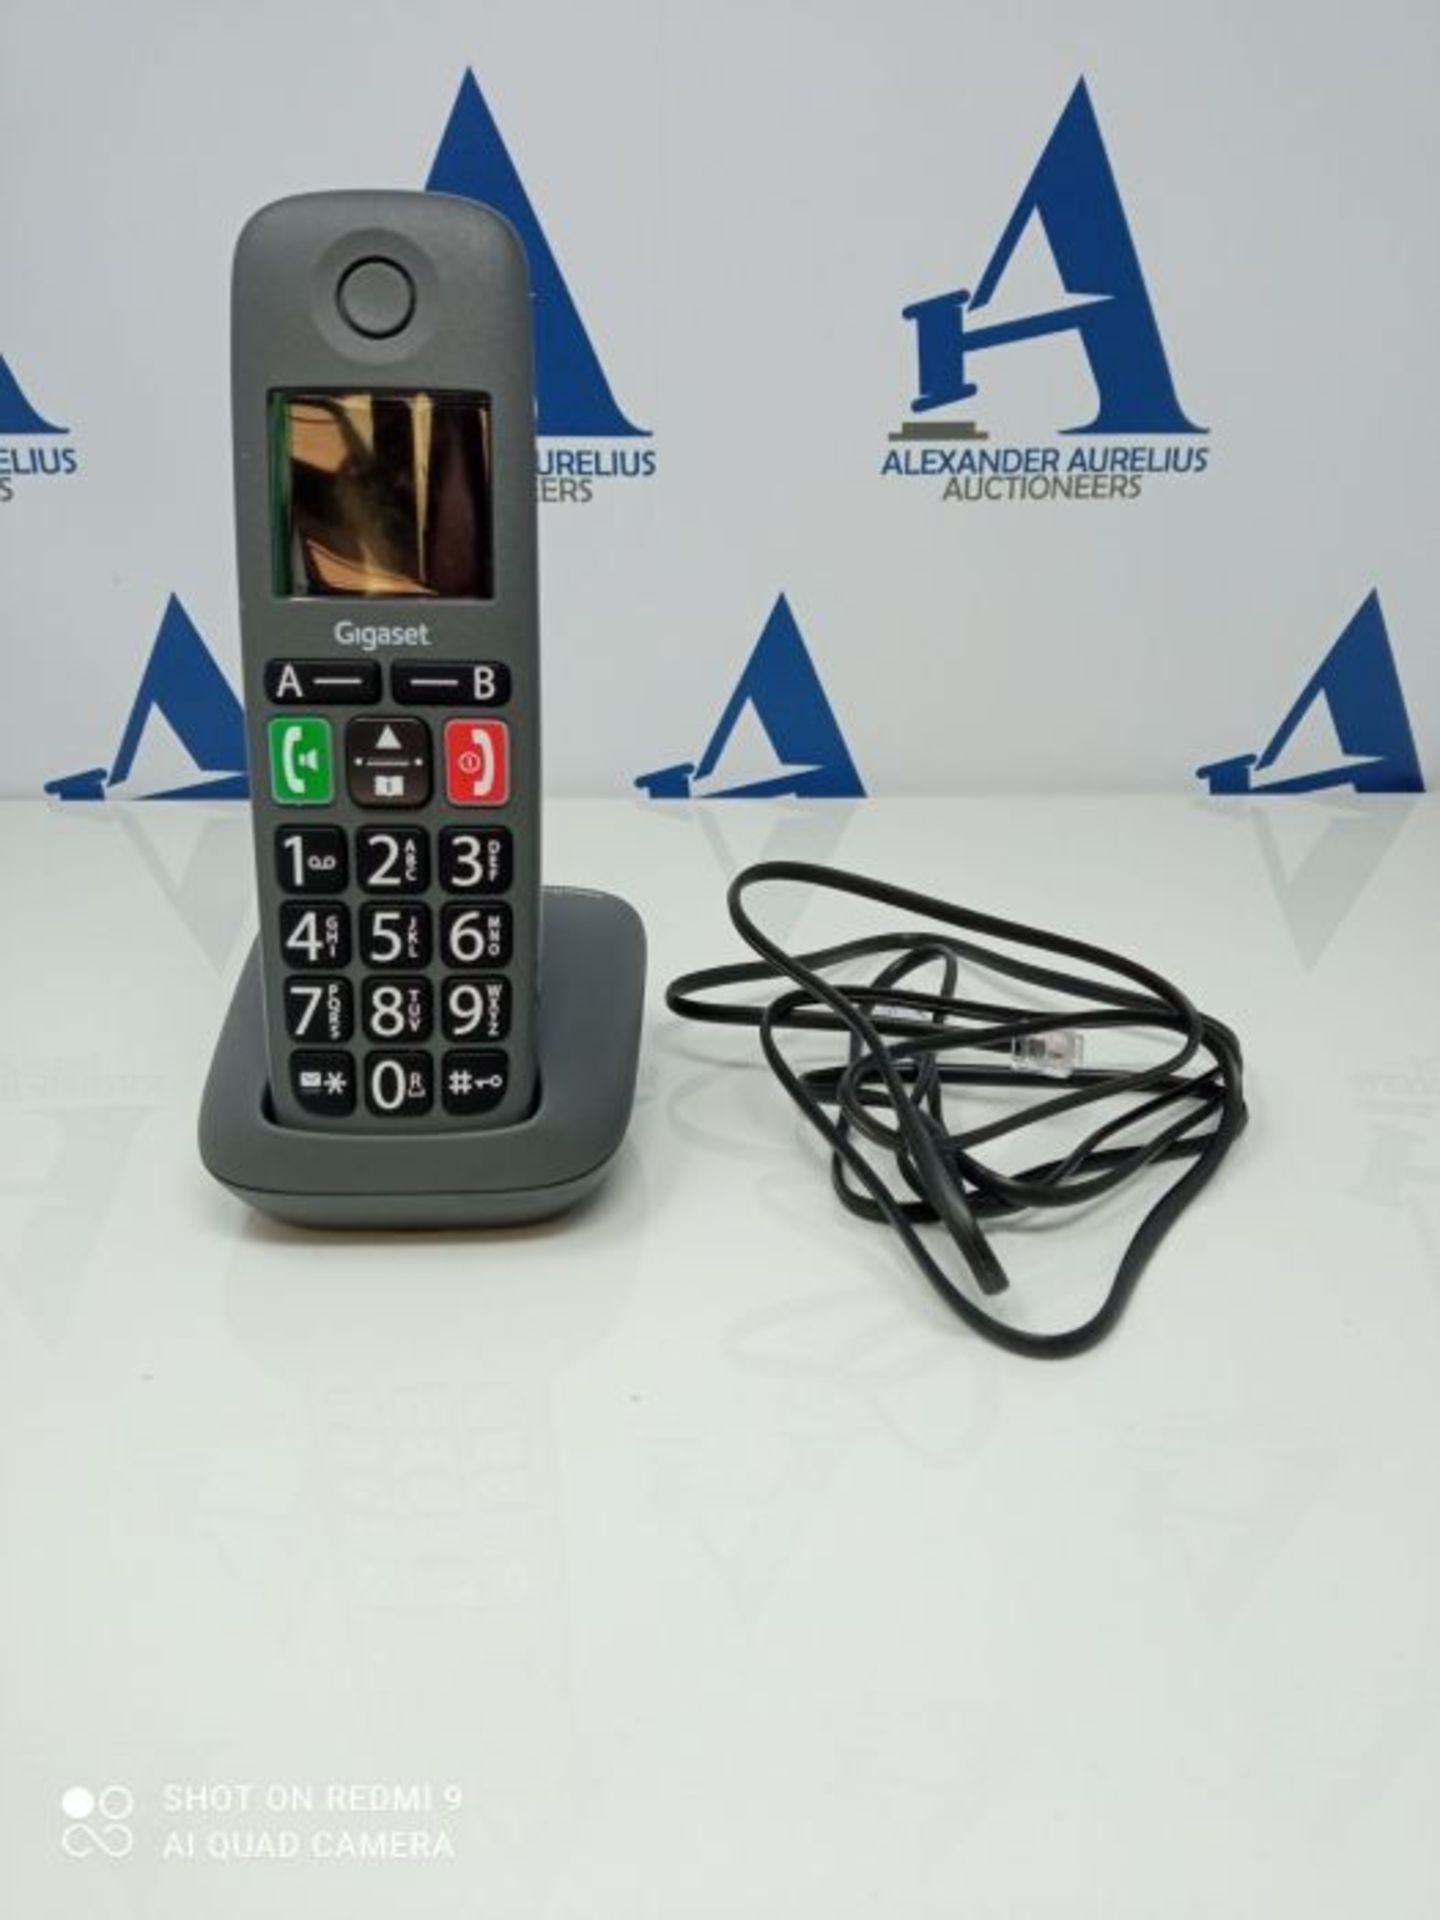 Gigaset EASY - Big Button Home Phone for Elderly with Nuisance Call Block and Hearing - Image 3 of 3